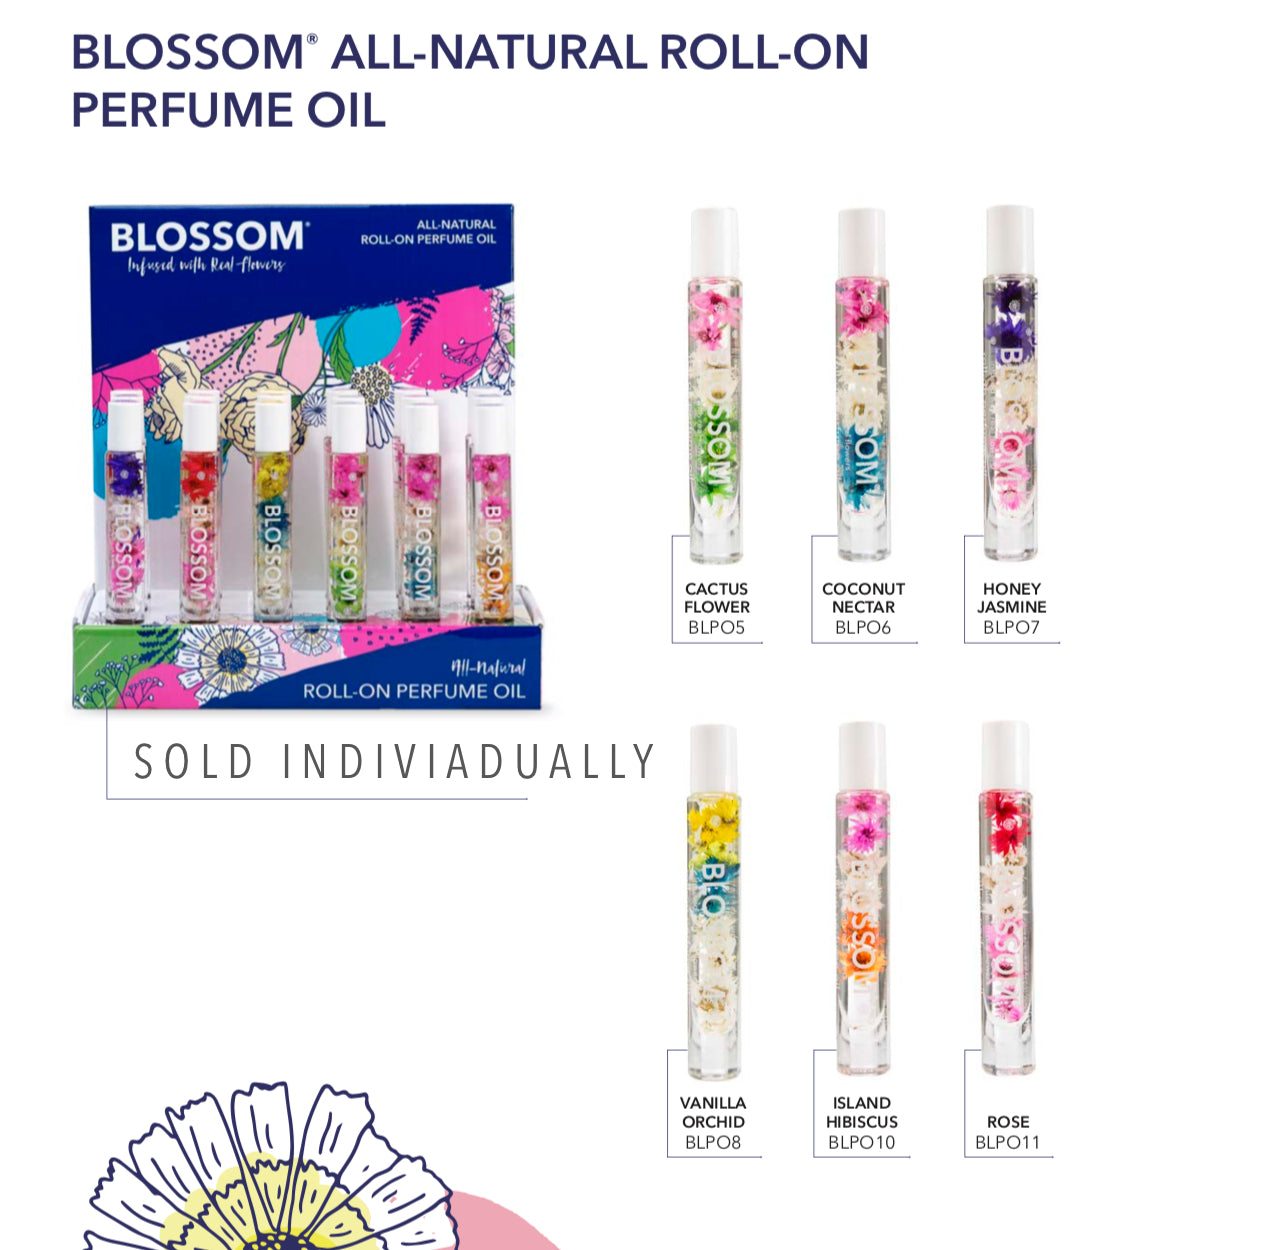 Blossom Roll-On Perfume Oil All-Natural Vegan Perfume Paraben-Free 1 Pc.